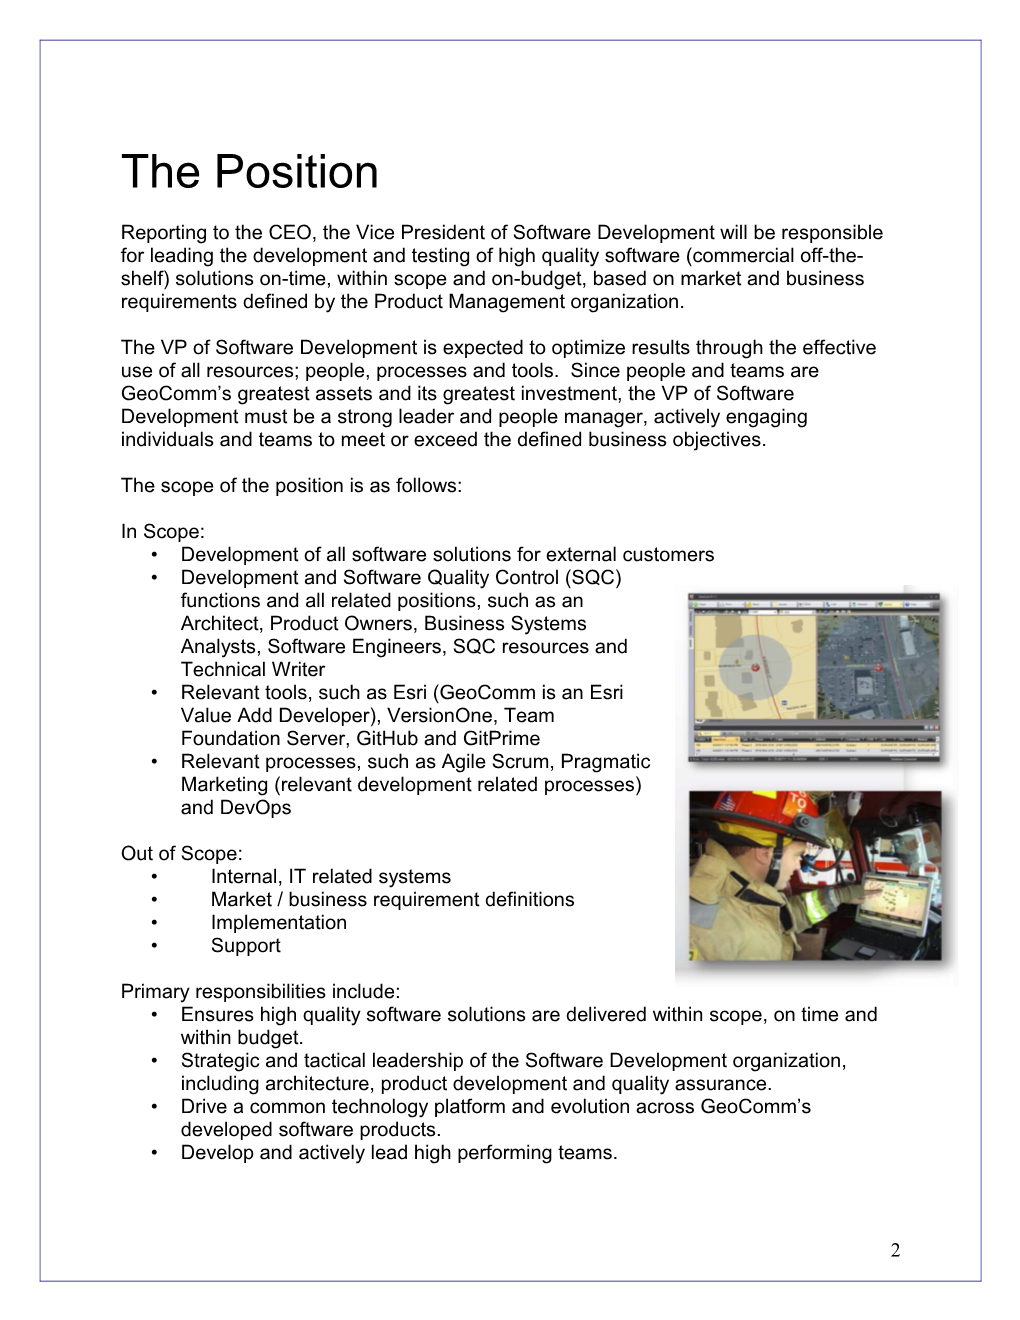 The Scope of the Position Is As Follows